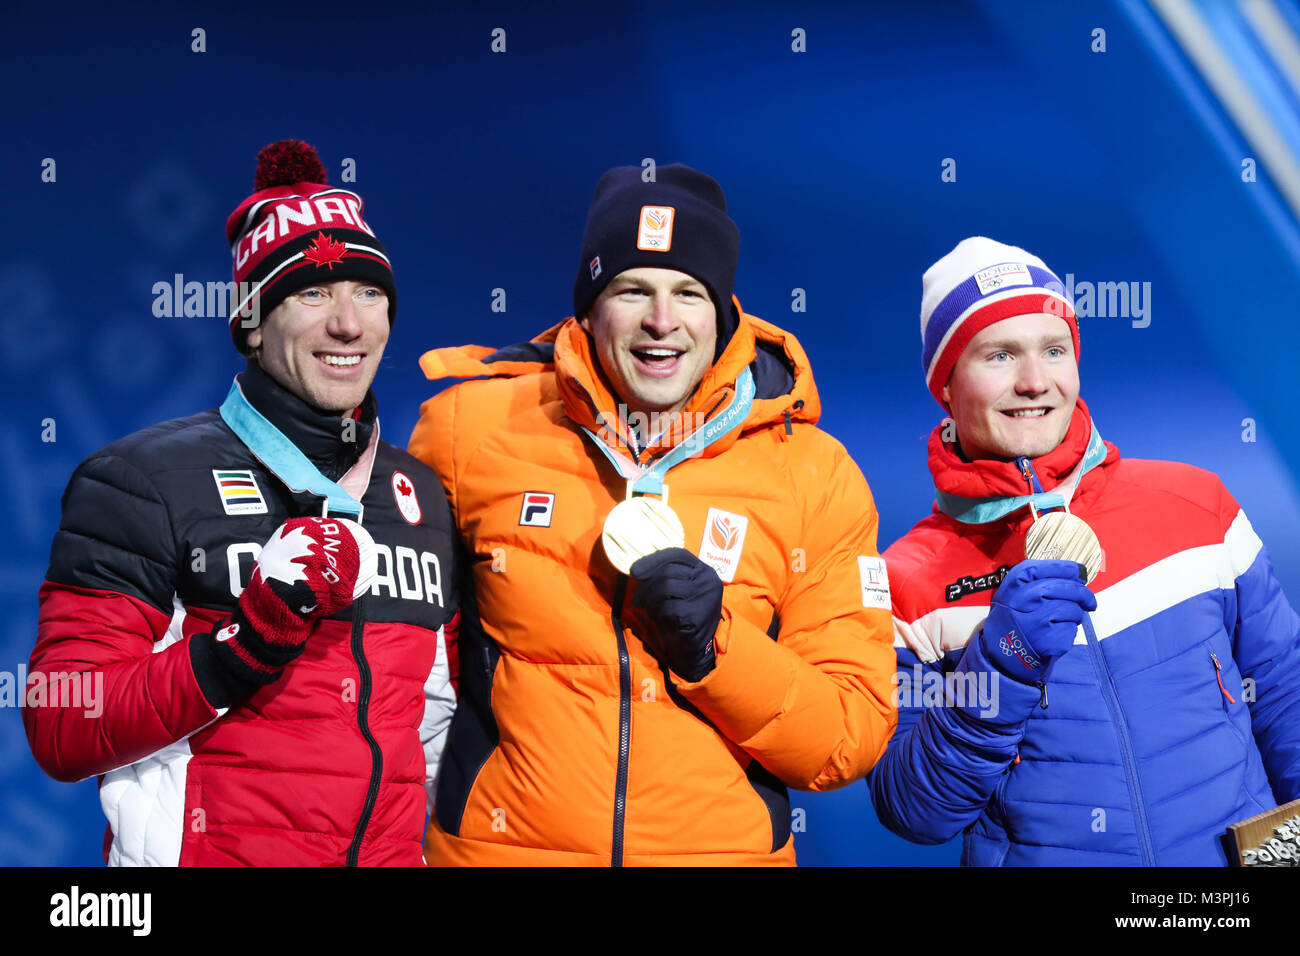 (180212) -- PYEONGCHANG, Feb. 12, 2018 (Xinhua) -- Champion Sven Kramer (C) from the Netherlands, second-placed Ted-Jan Bloemen (L) from Canada and third-placed Sverre Lunde Pedersen from Norway pose for photos during the medal ceremony for men's 5000m event of speed skating at 2018 PyeongChang Winter Olympic Games at the Medal Plaza in PyeongChang, South Korea, on Feb. 12, 2018. (Xinhua/Wu Zhuang) Stock Photo